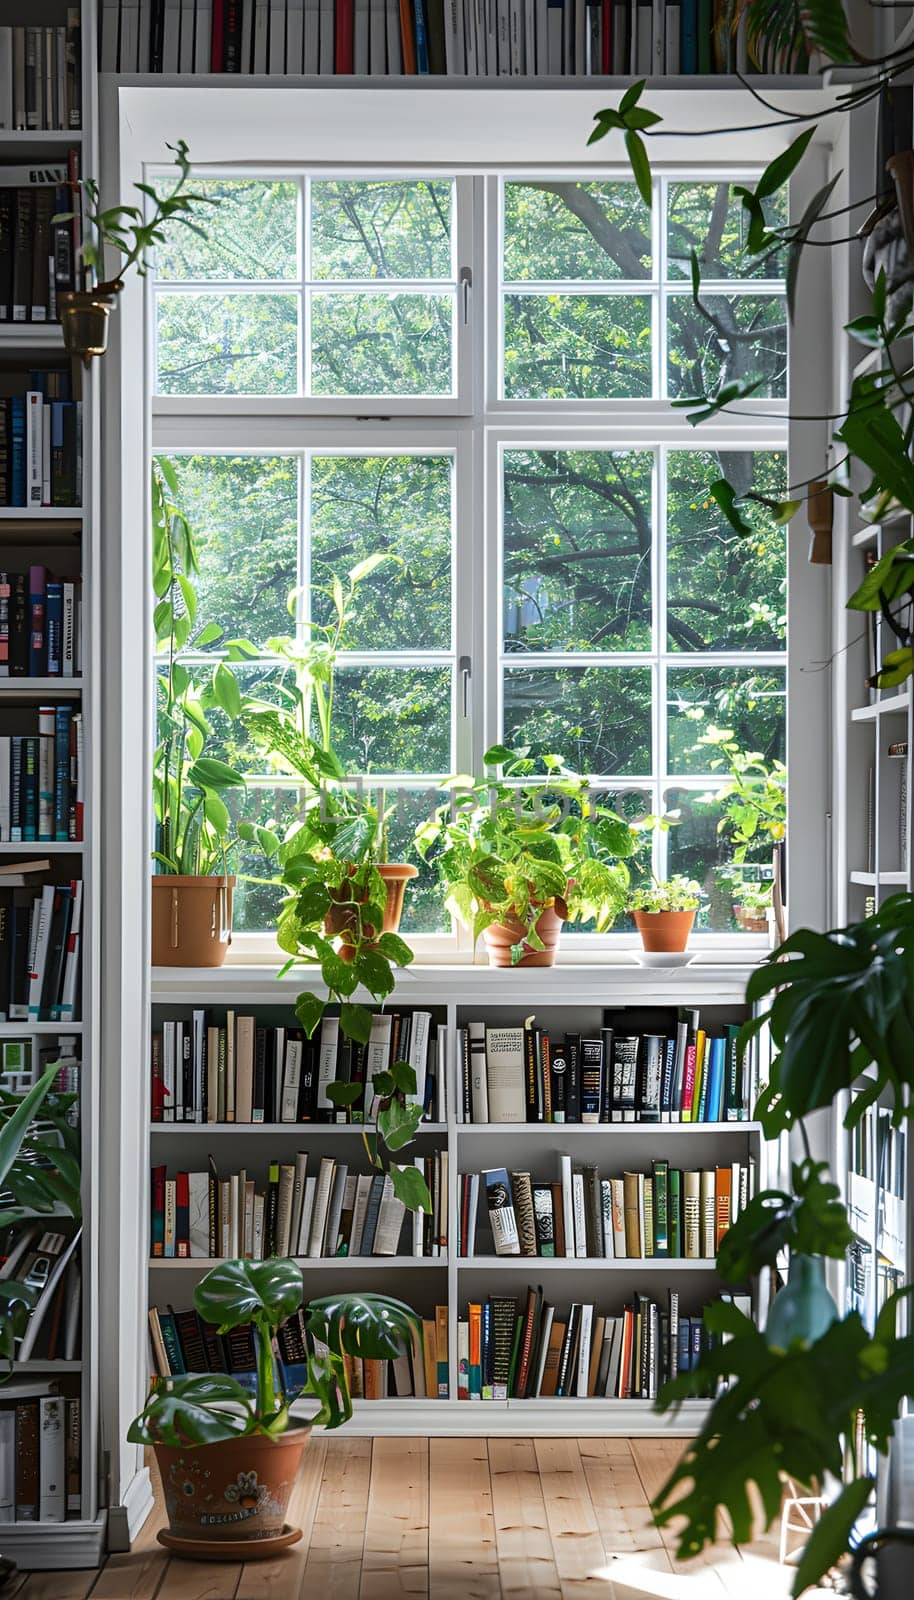 Building filled with books, plants on shelves in front of window by Nadtochiy